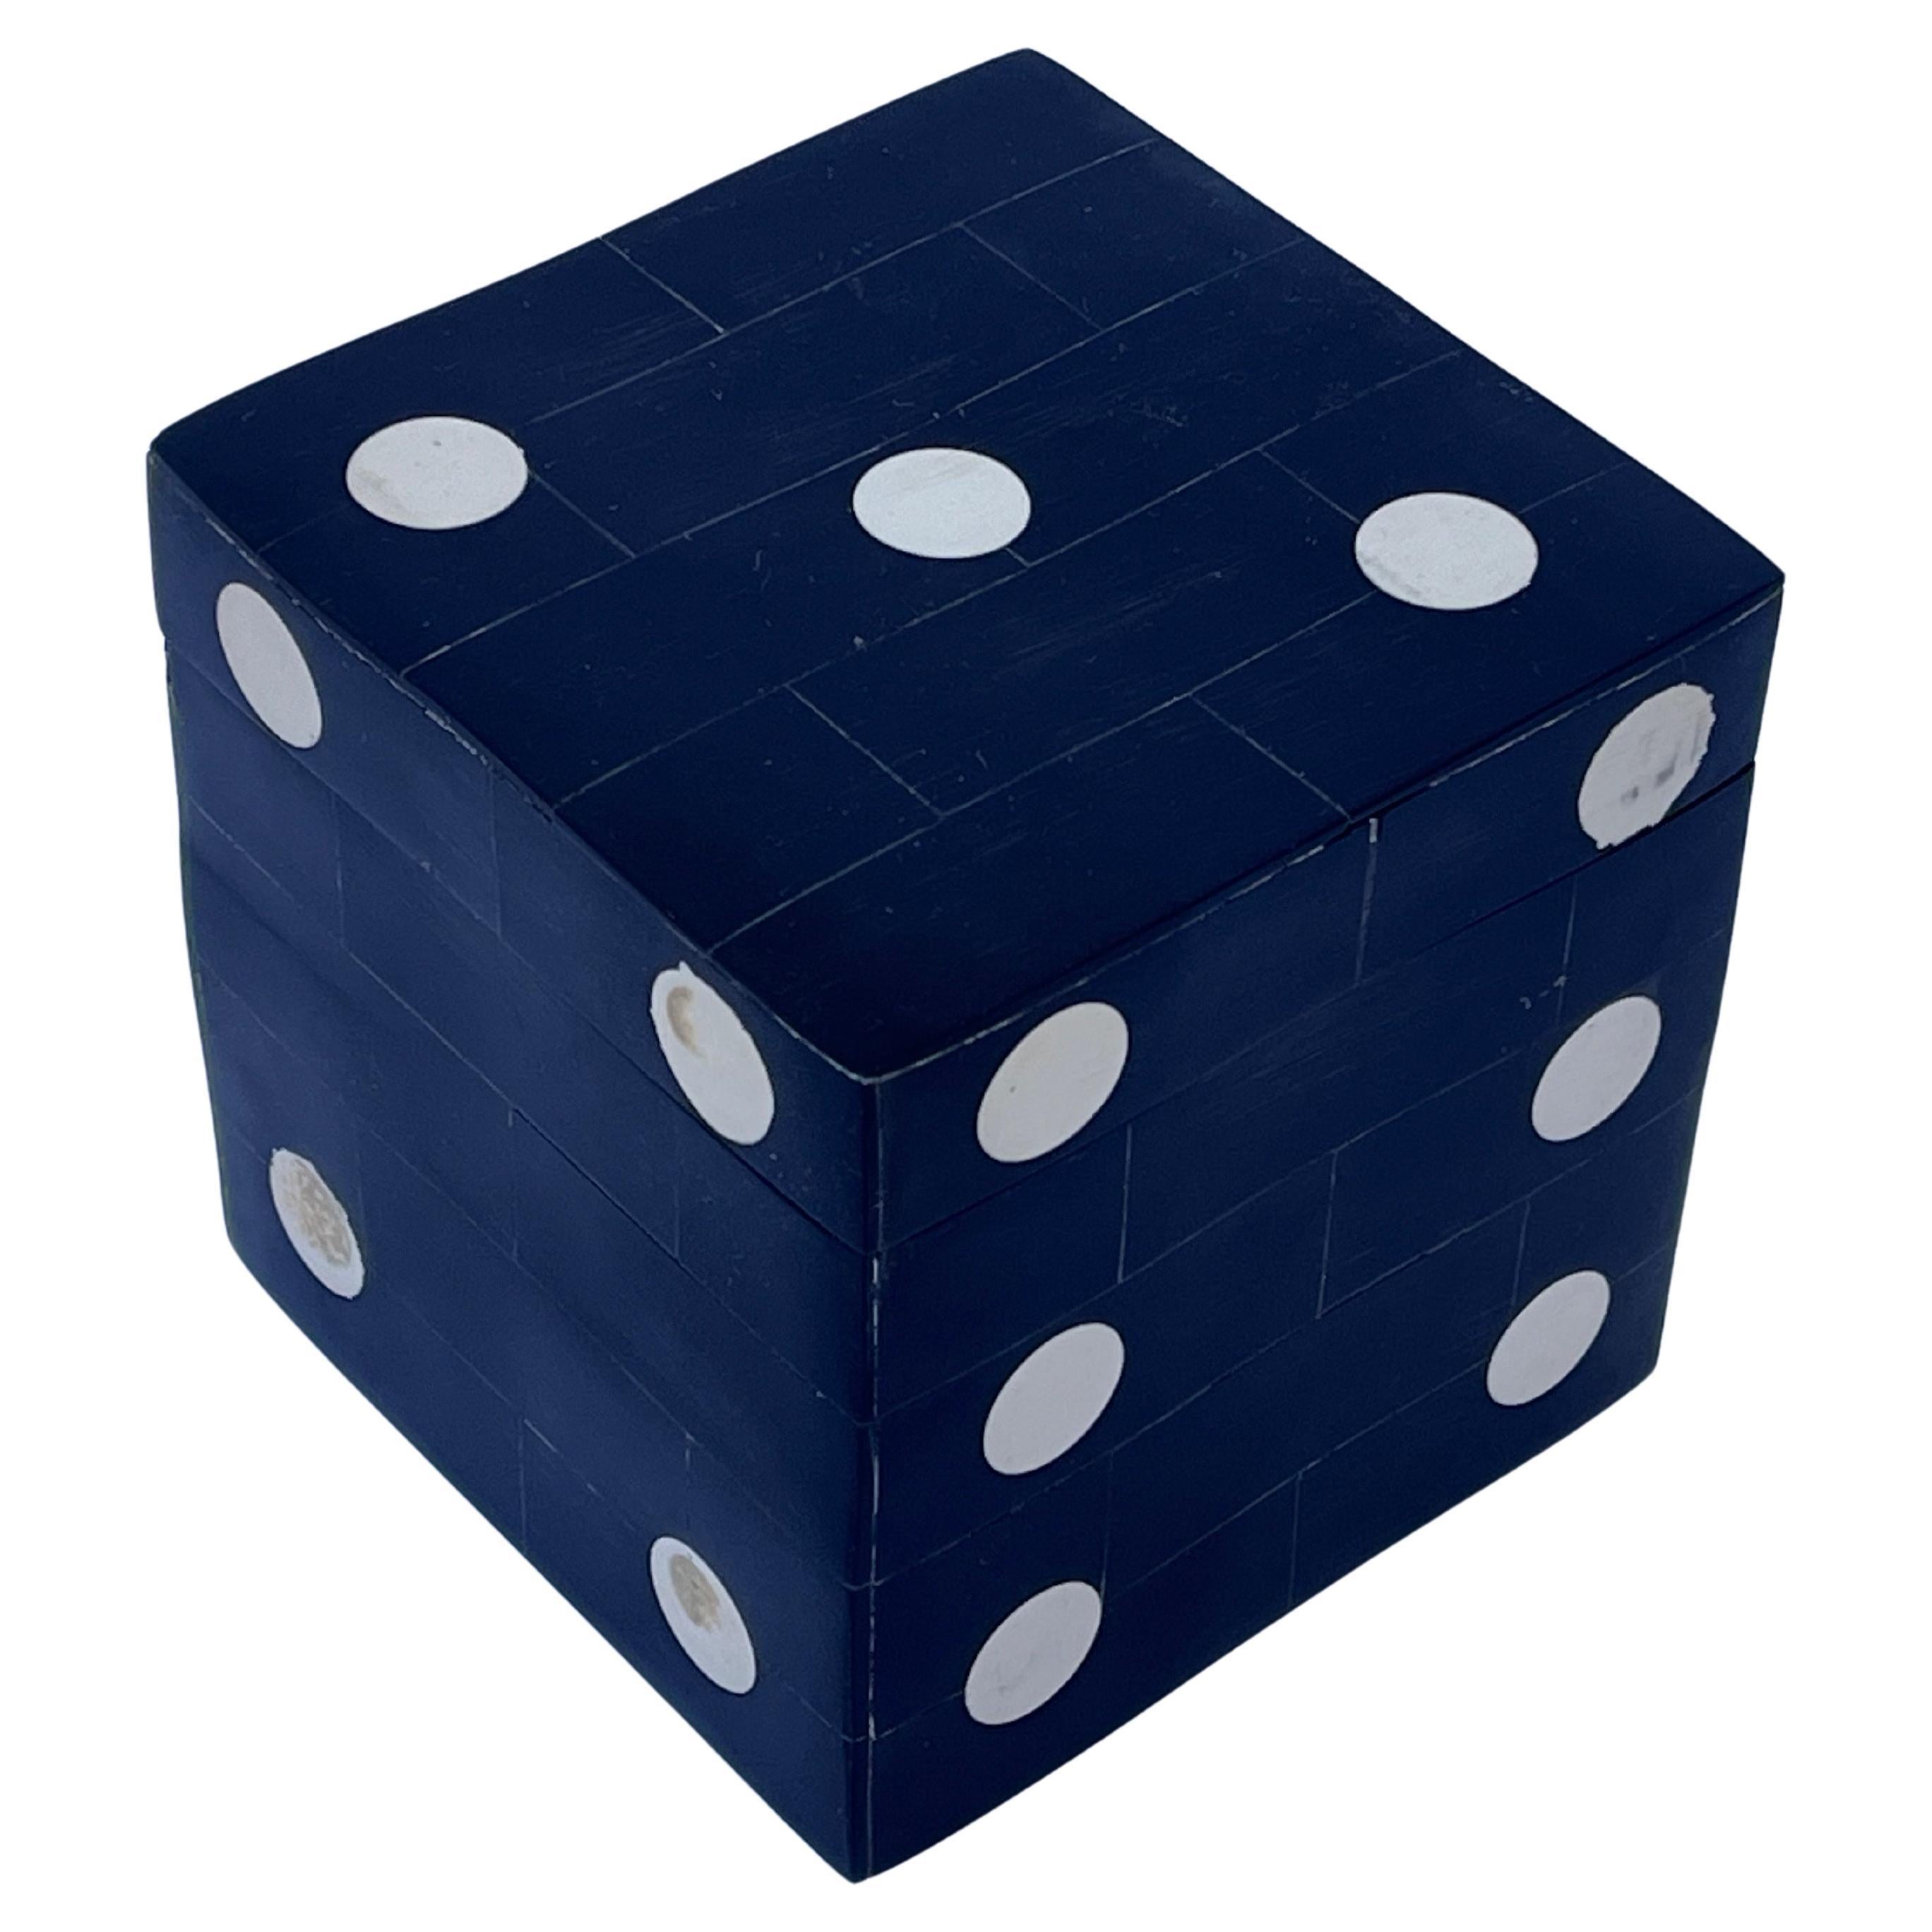 Tessellated Vintage Dice or Die Lidded Cube Box Paperweight Desk Accessory  For Sale